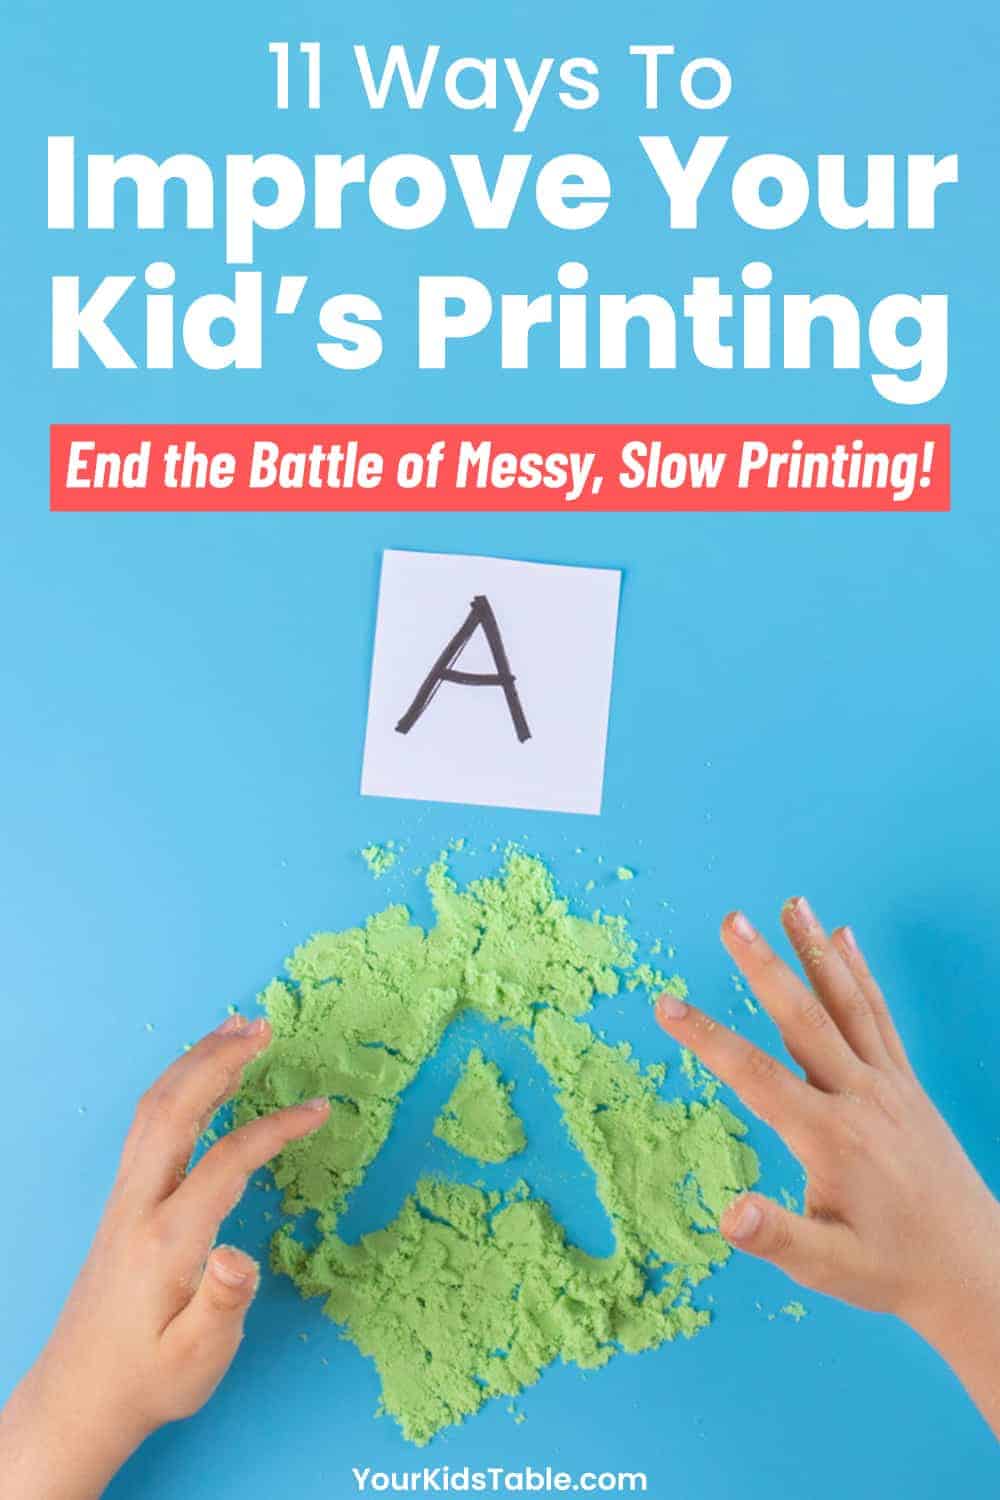 at føre større for eksempel 11 Fun Ways to Improve Your Kid's Printing Skills - Your Kid's Table